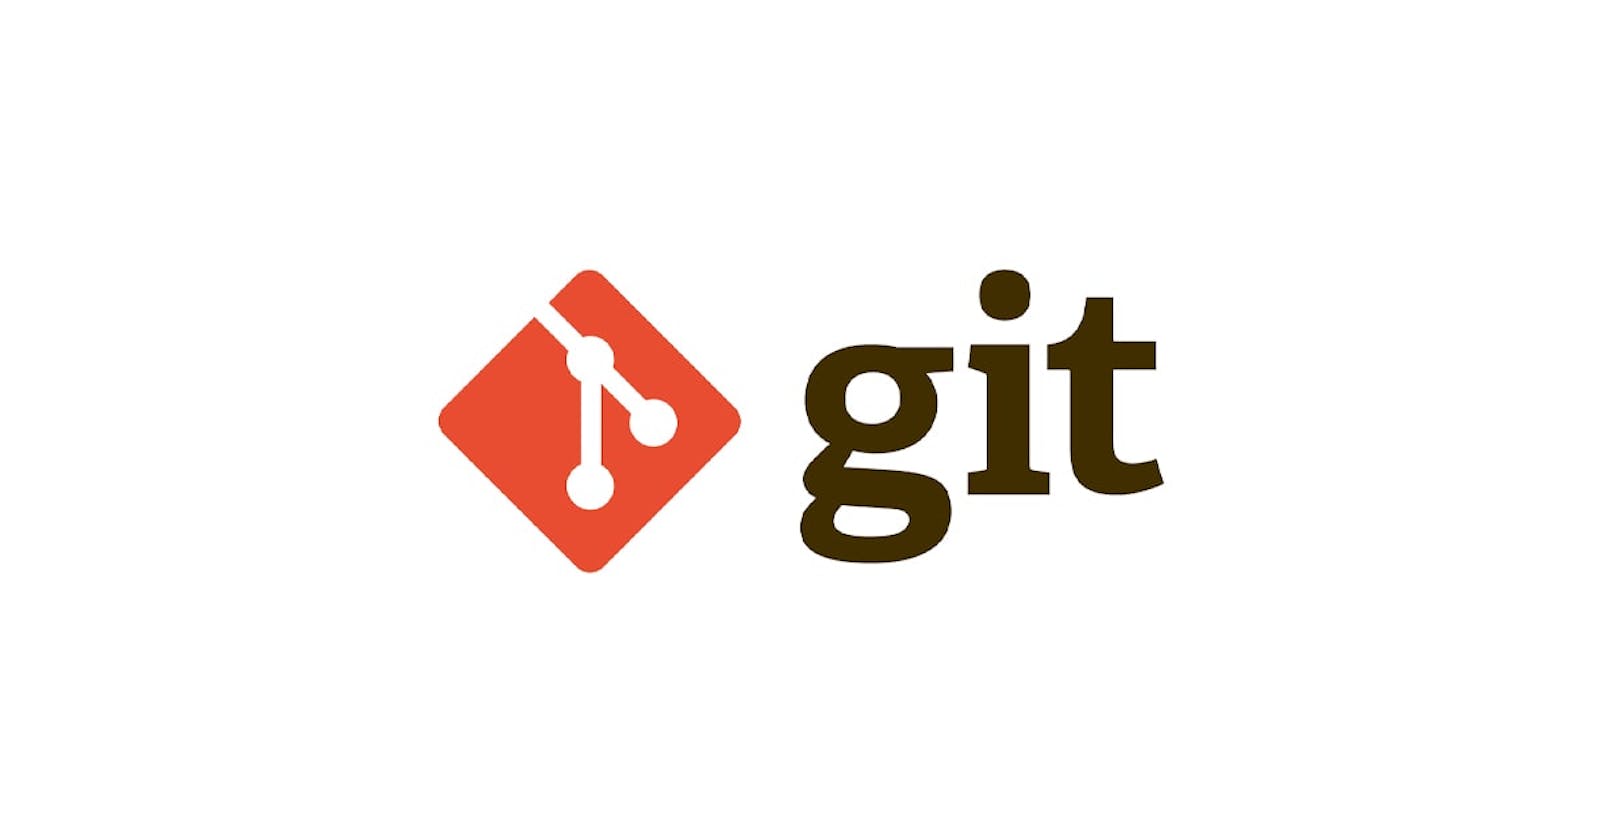 How to disconnect your local git repo from the remote master.